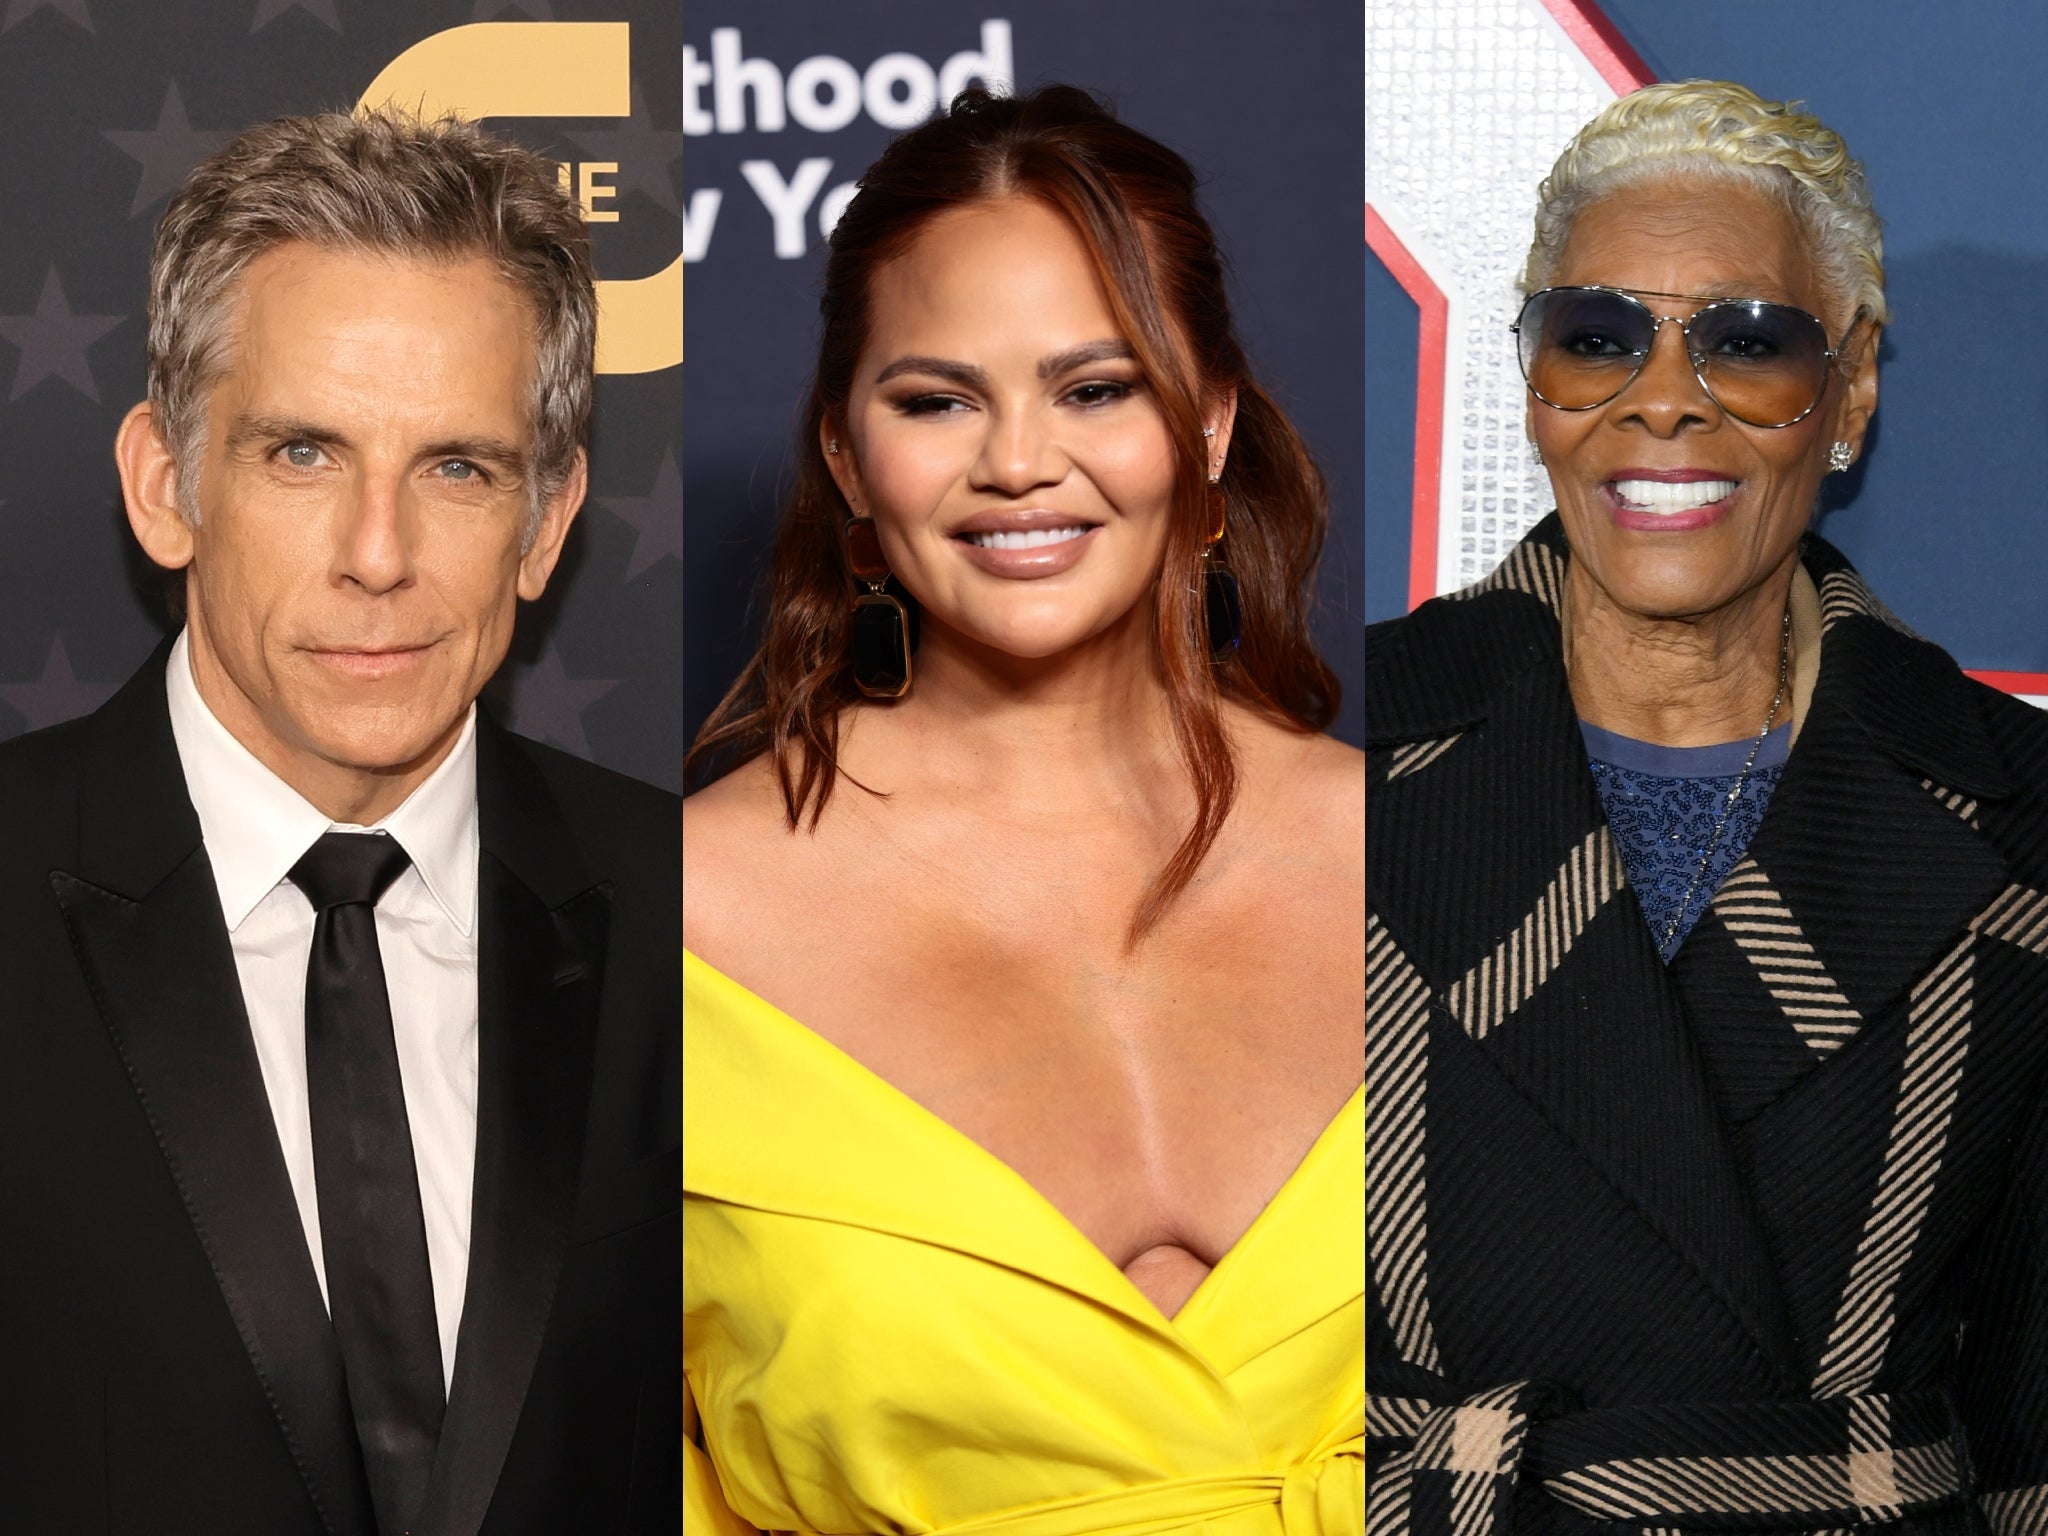 Ben Stiller, Chrissy Teigen and Dionne Warwick are among celebrities who have reacted to losing their Twitter blue checkmarks